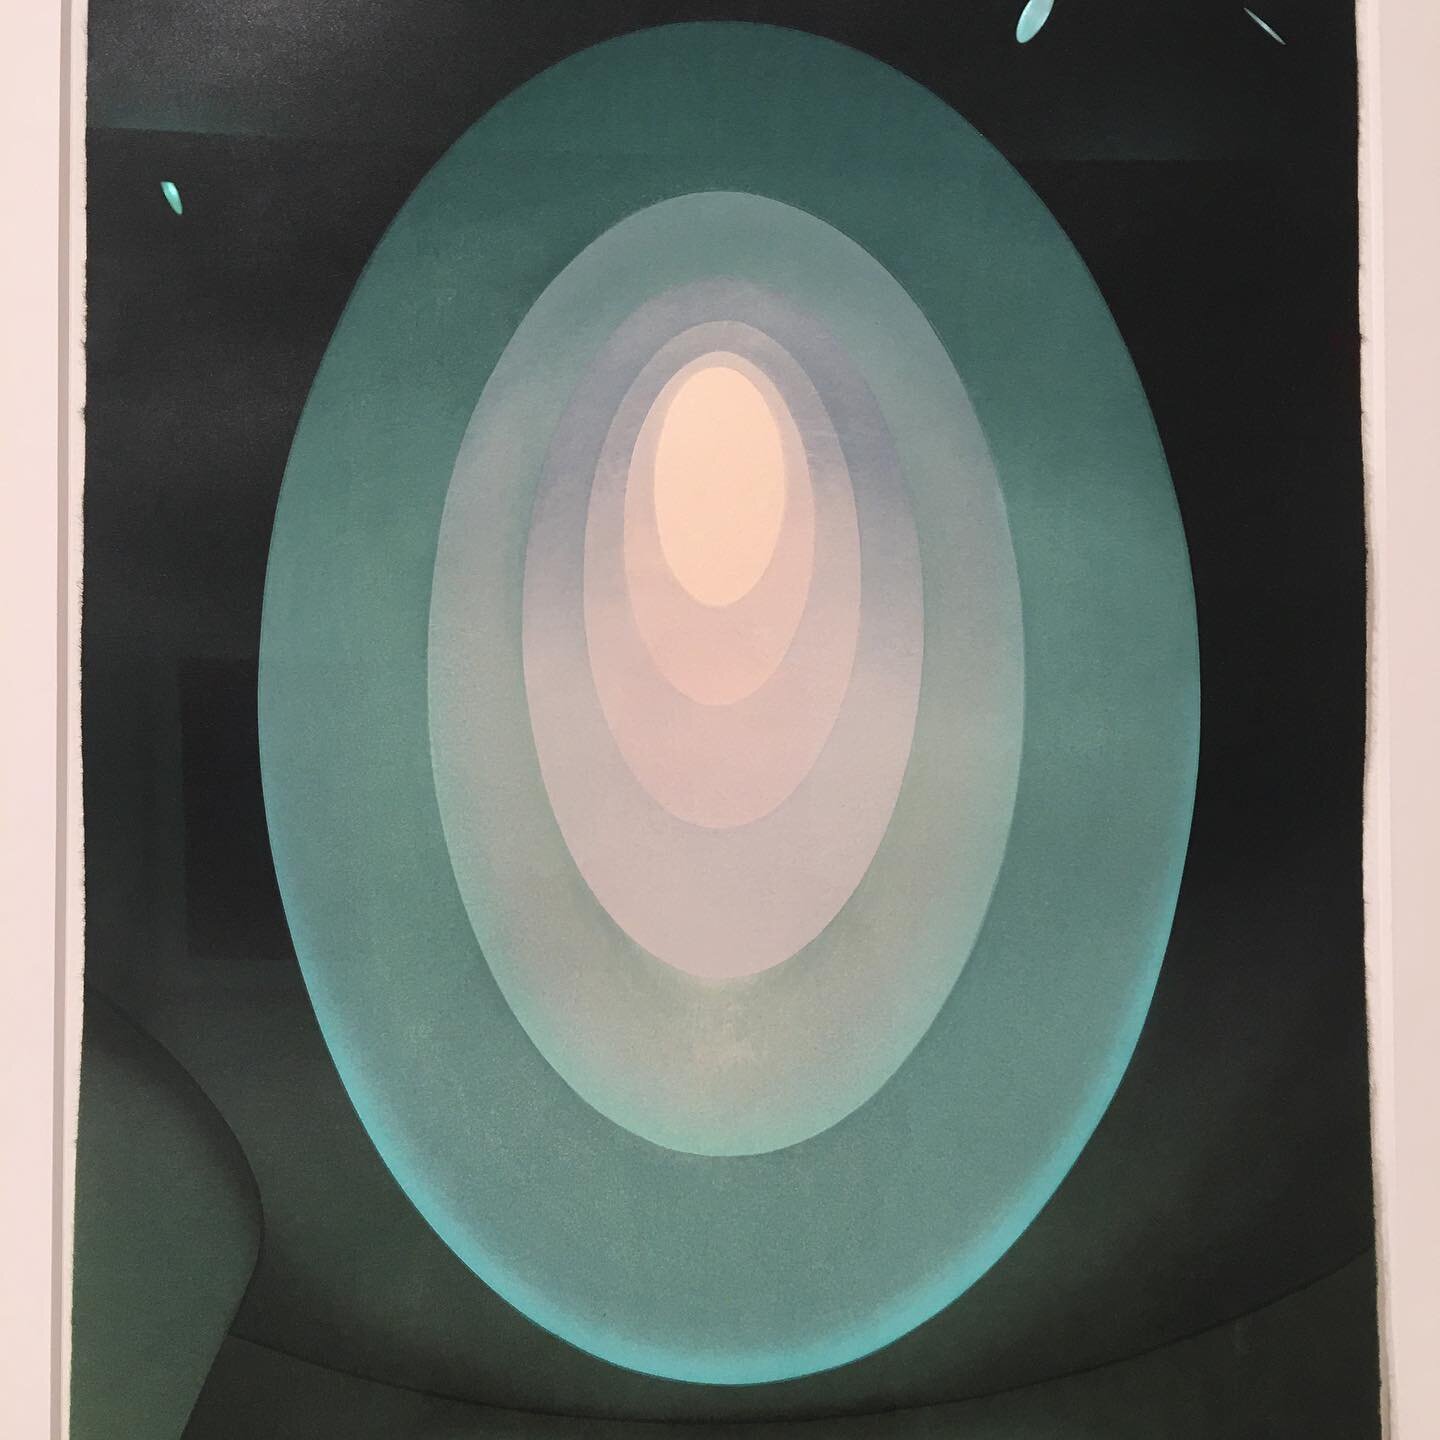 Beautiful work by James Turrell at @paceprints